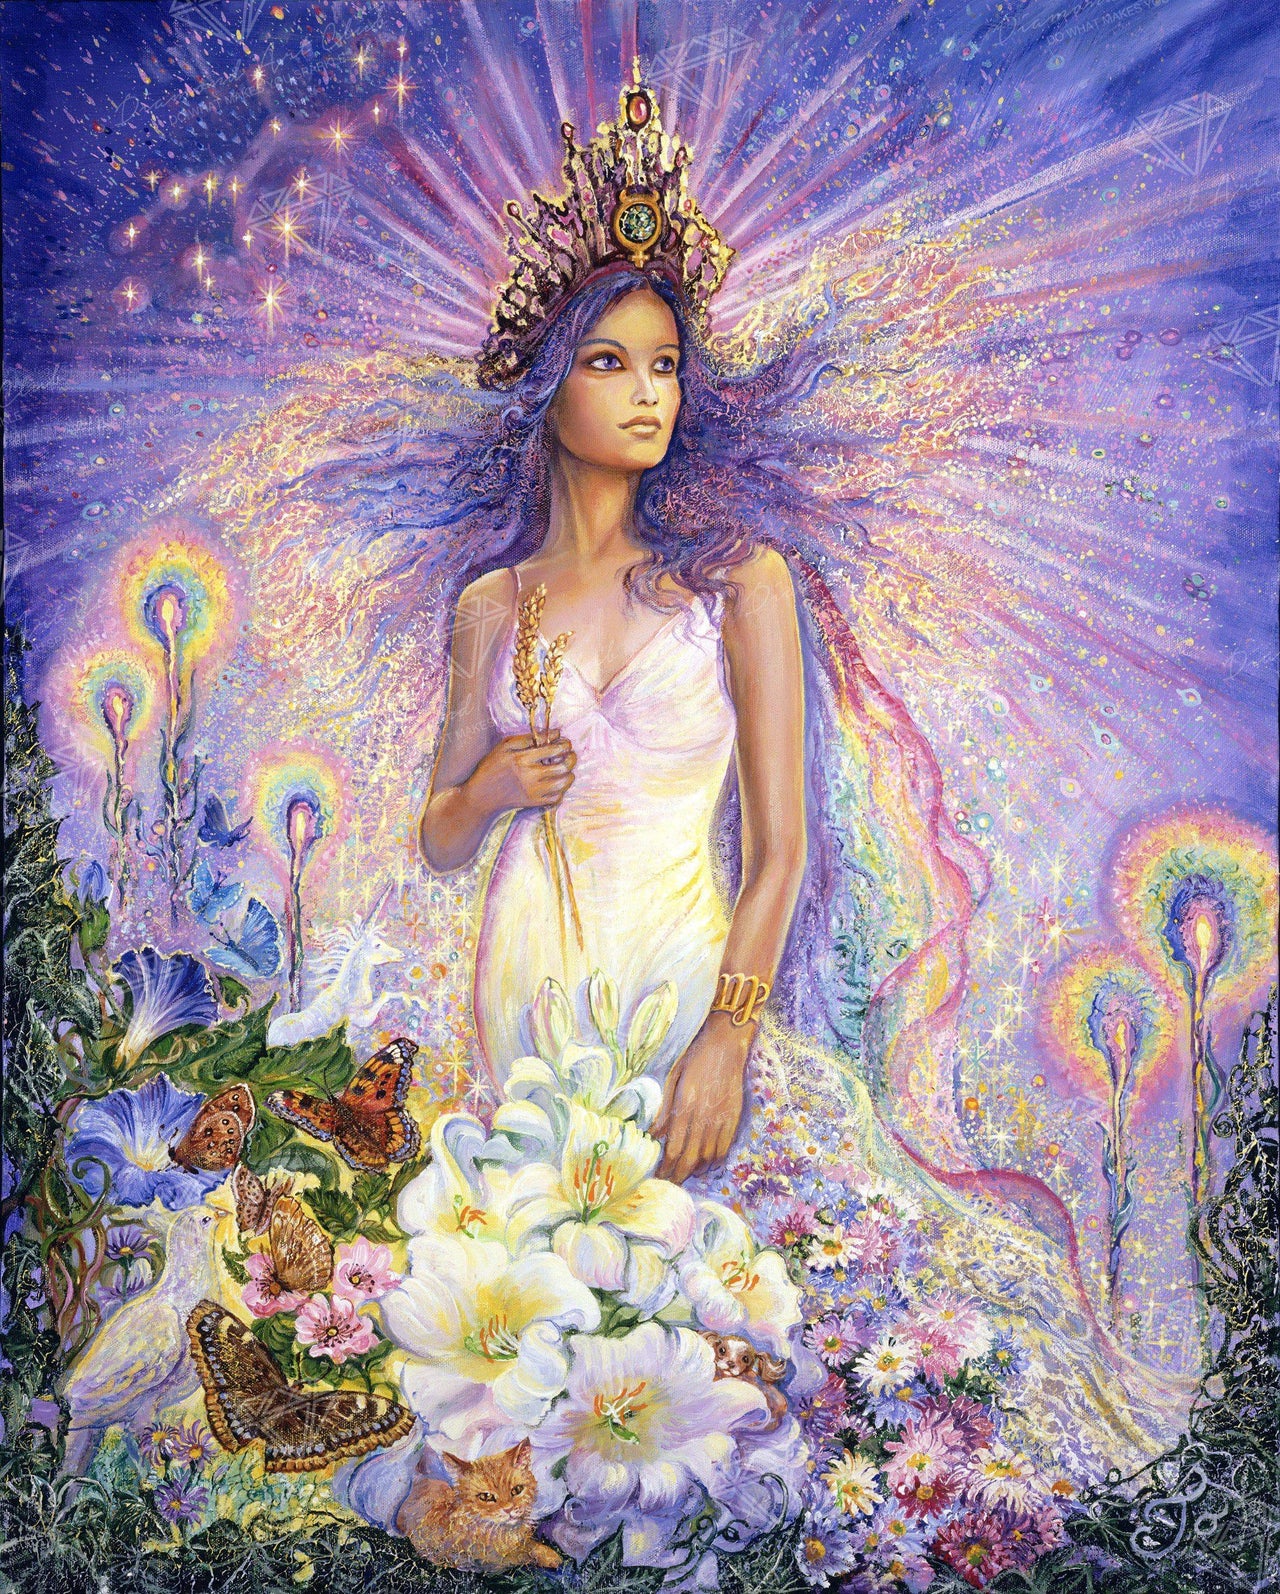 Diamond Painting Virgo 27.6" x 34.2″ (70cm x 87cm) / Square with 55 Colors including 3 ABs / 95,559